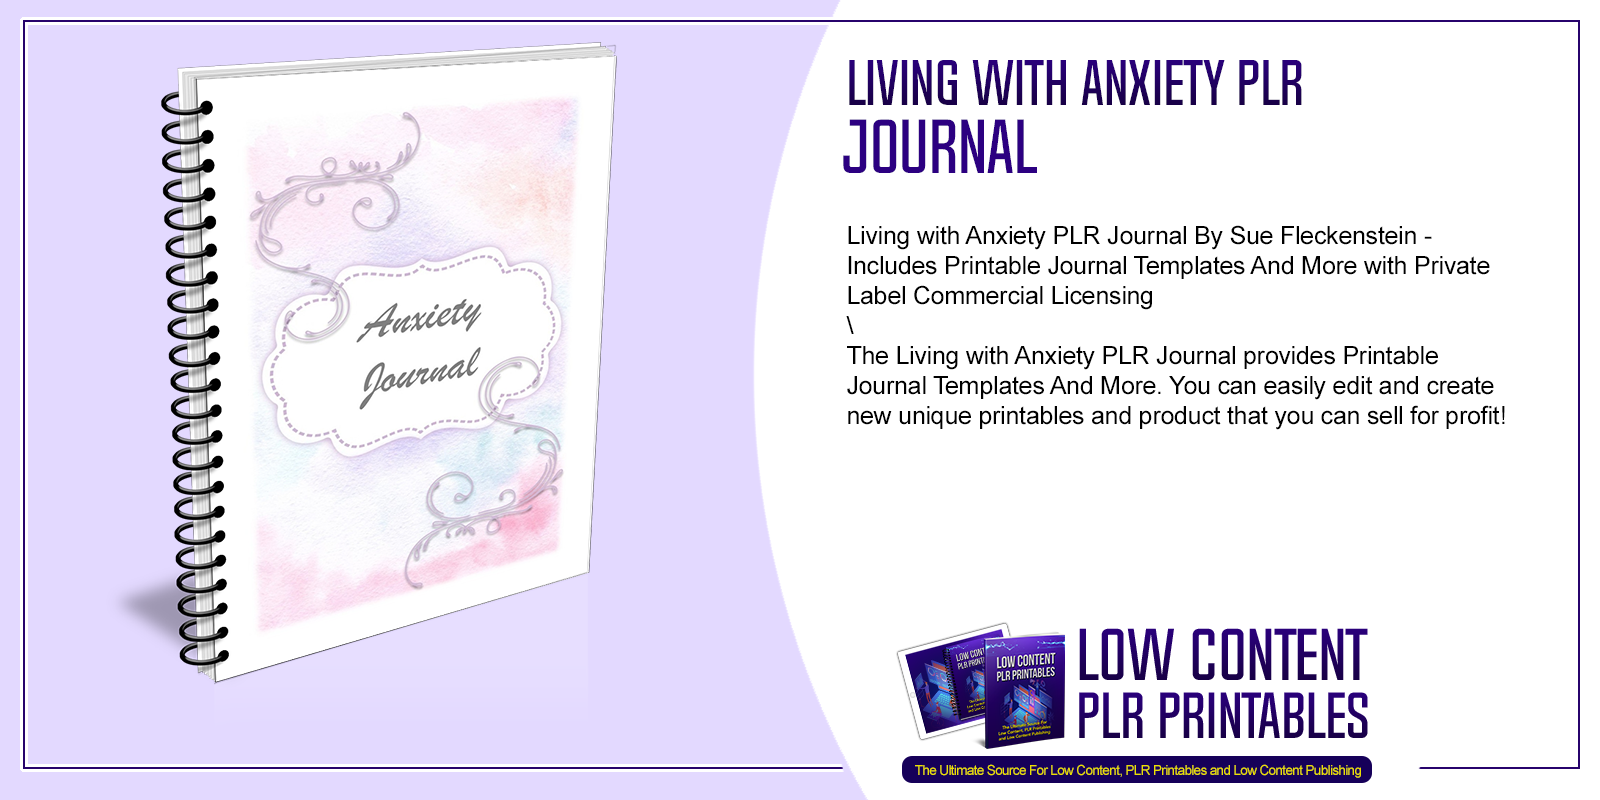 Living with Anxiety PLR Journal